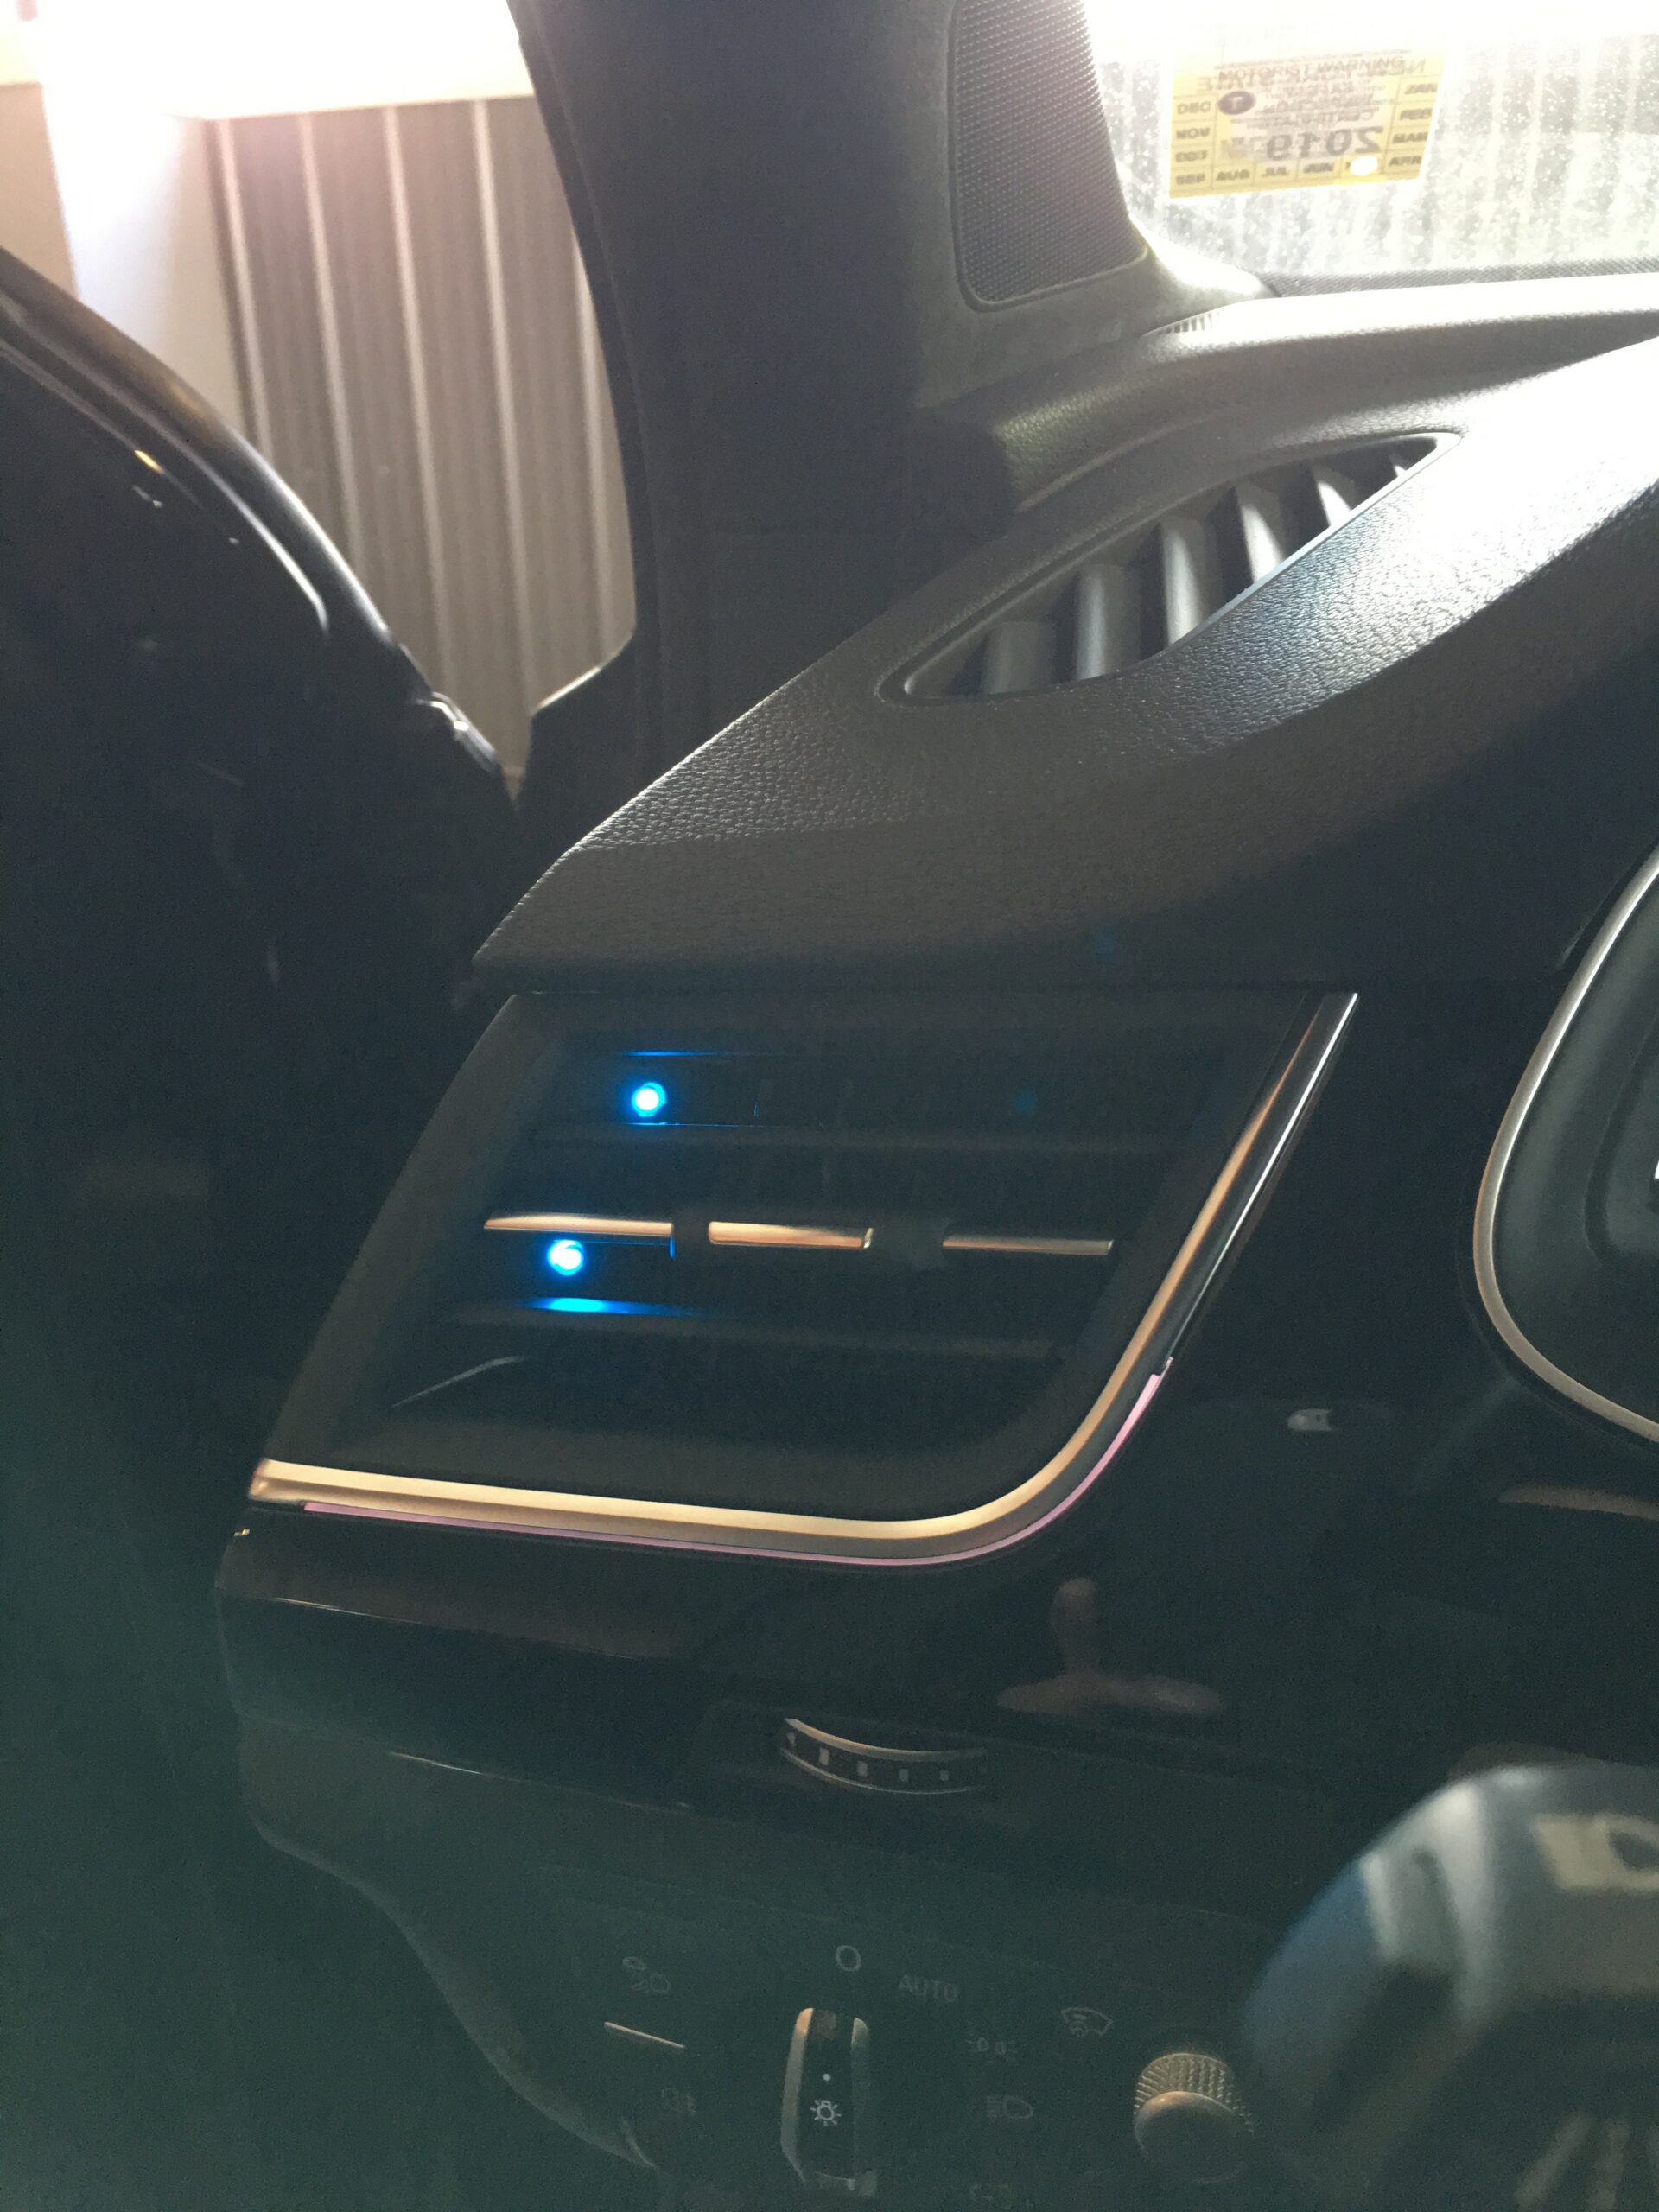 k40 installed radar detection alert leds in an air vent in a 2019 audi q5 in new jersey